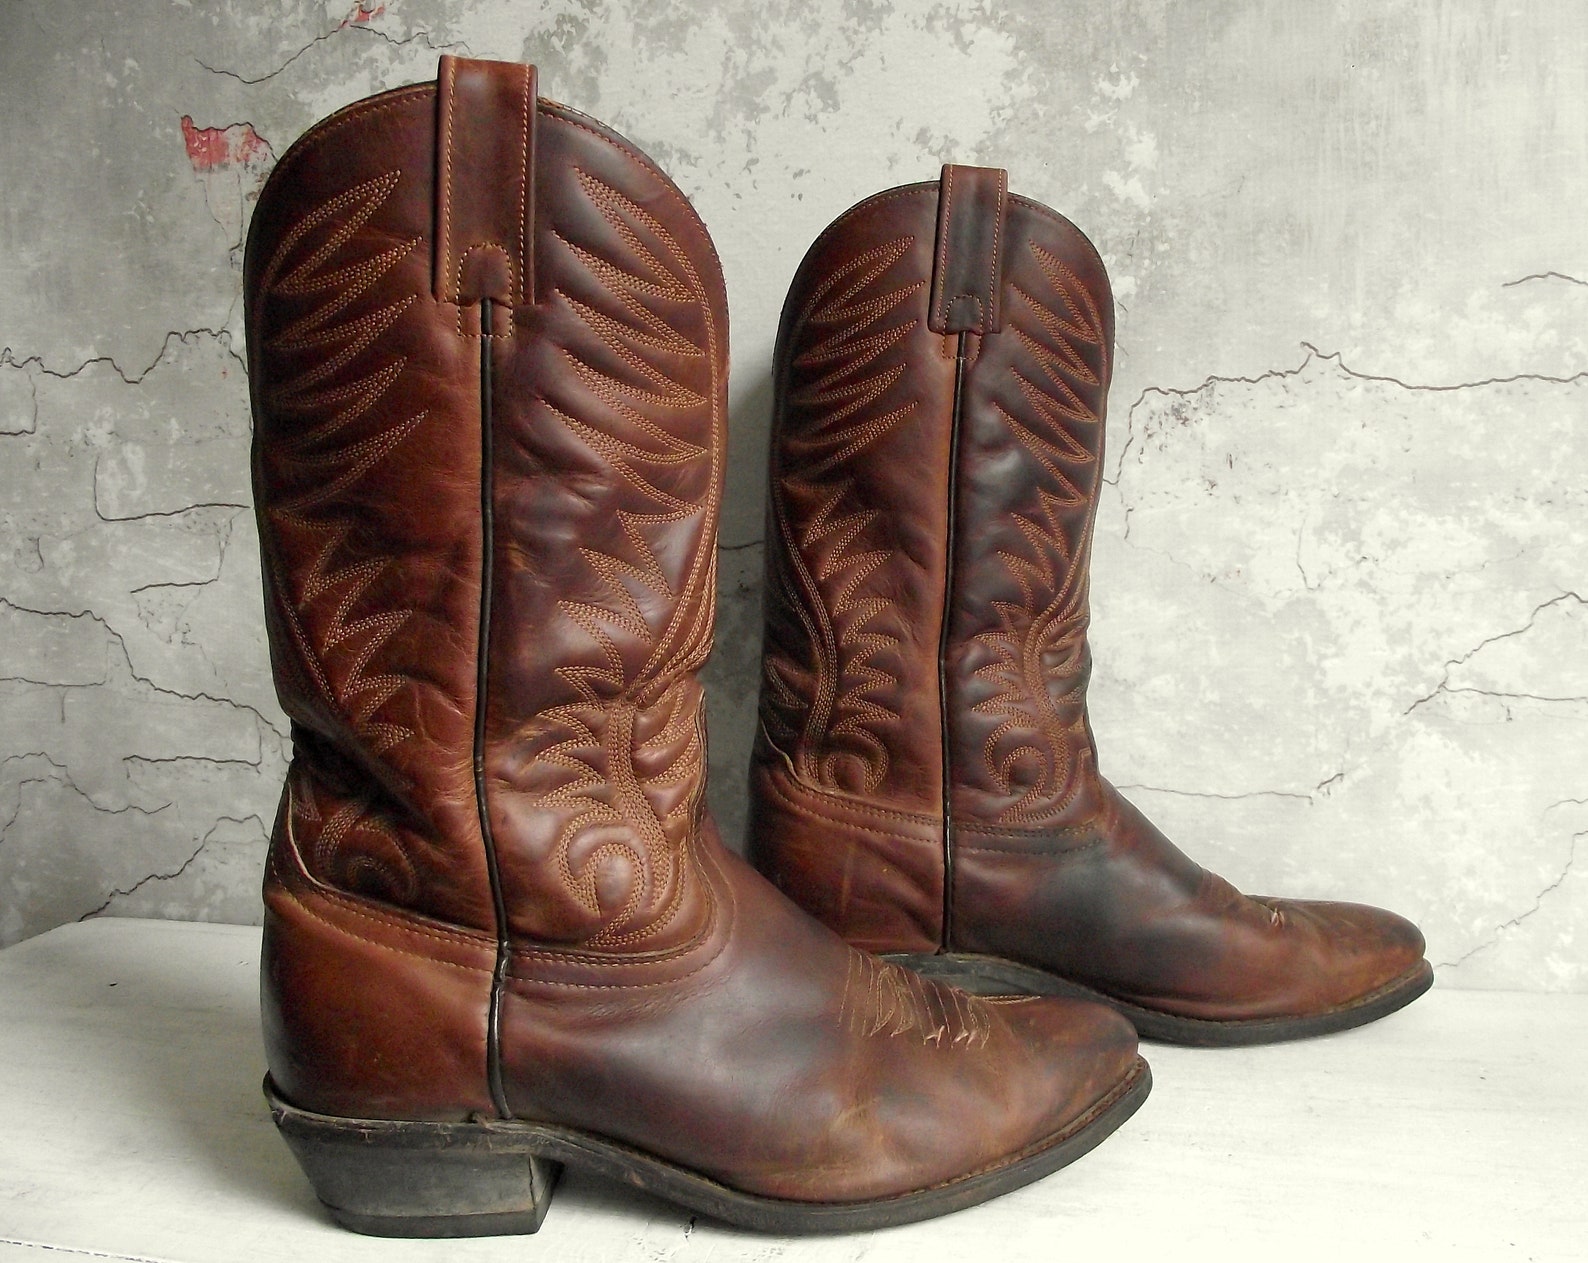 Vintage BOULET Cowboy Boots Western Riding Boots Leather - Etsy Canada